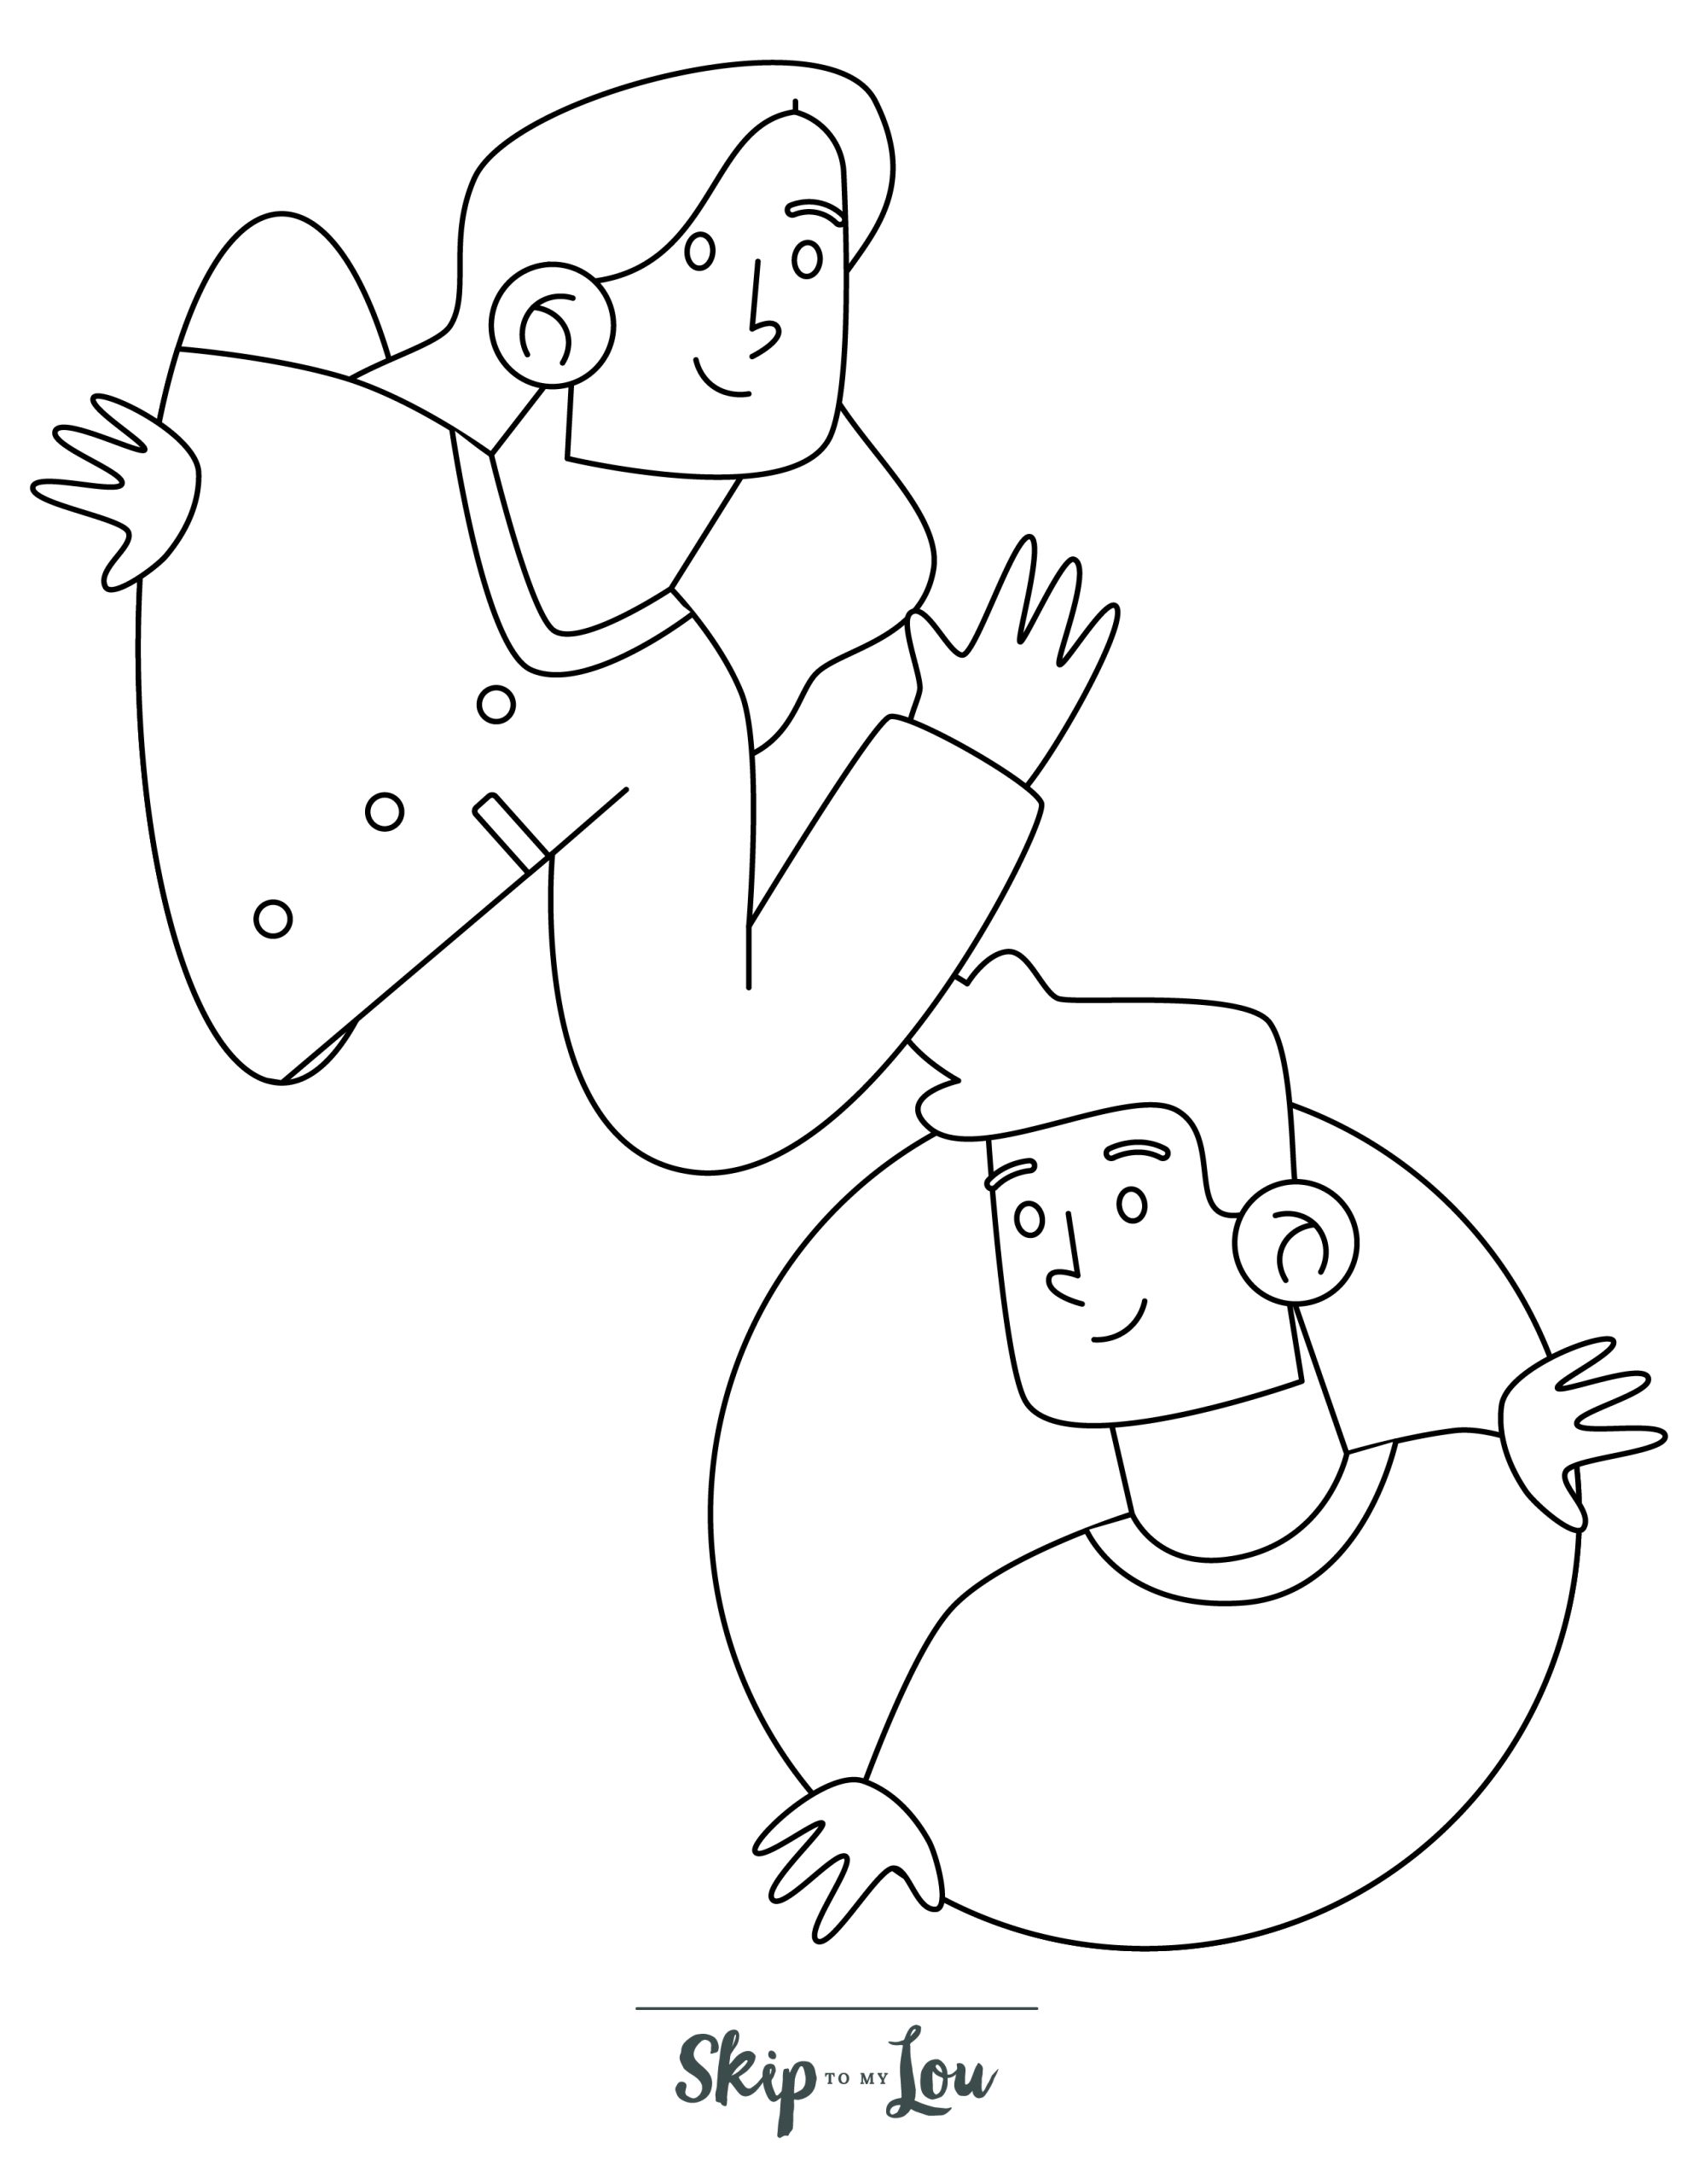 People Coloring Page 11 - Line drawing of people talking in bubbles